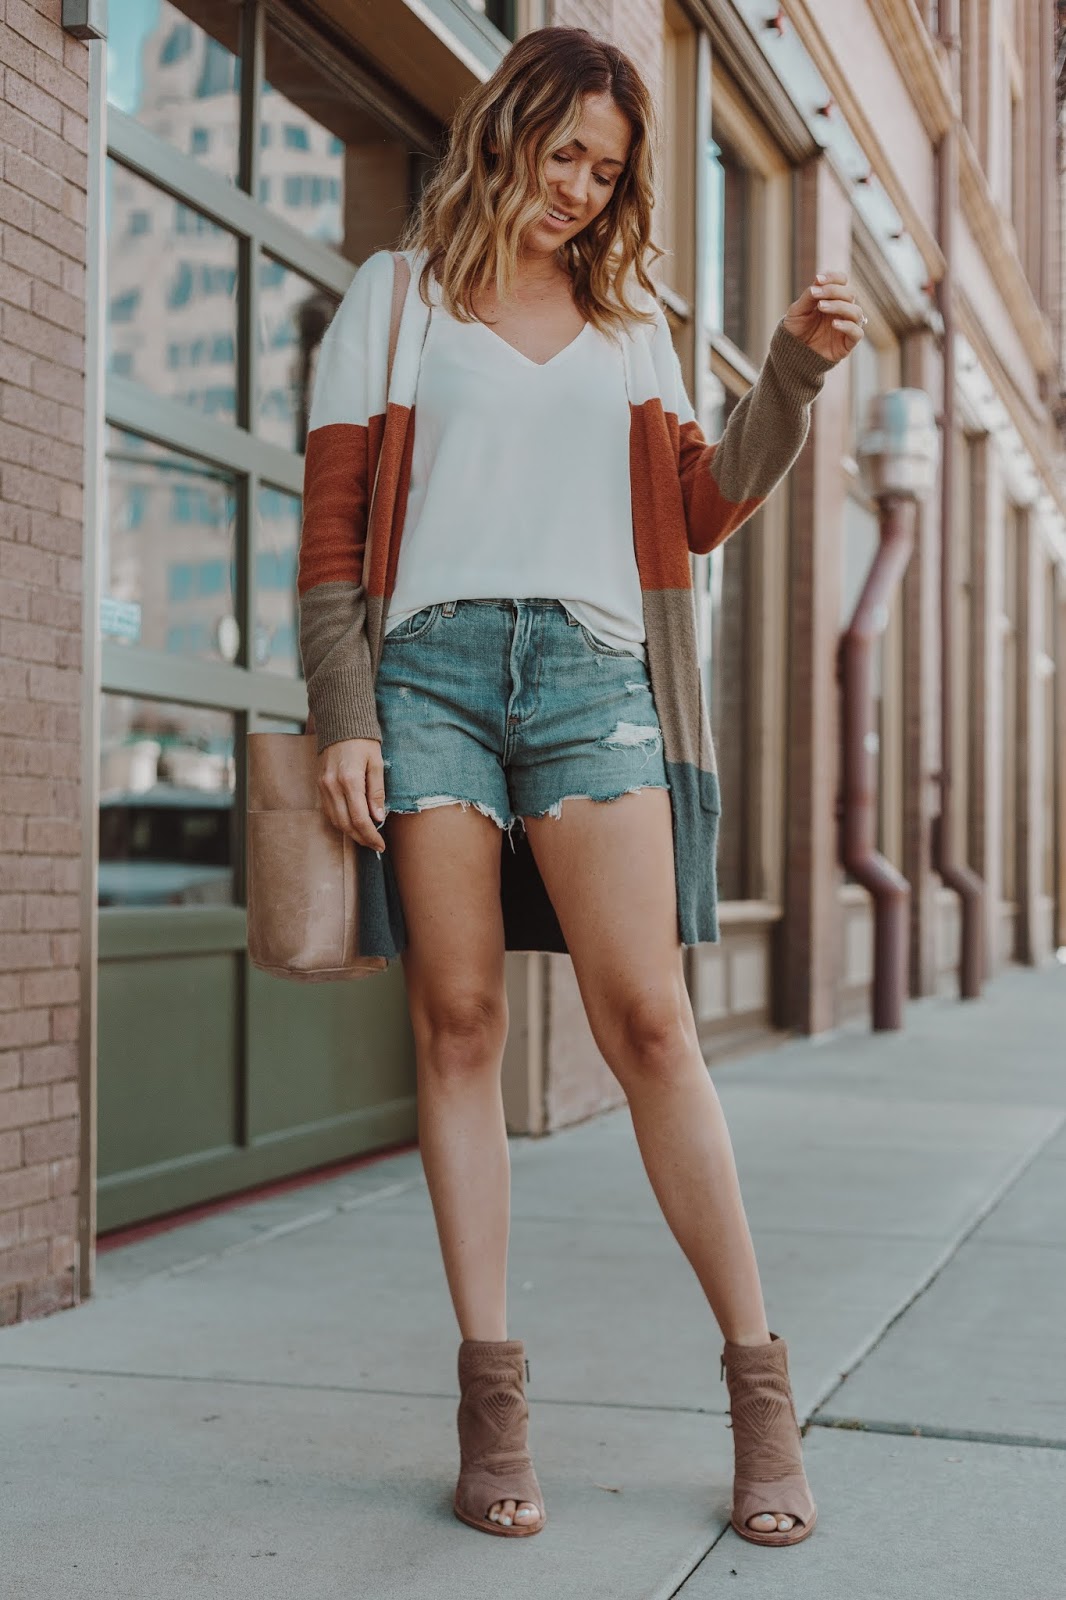 Cardigan with shorts and booties